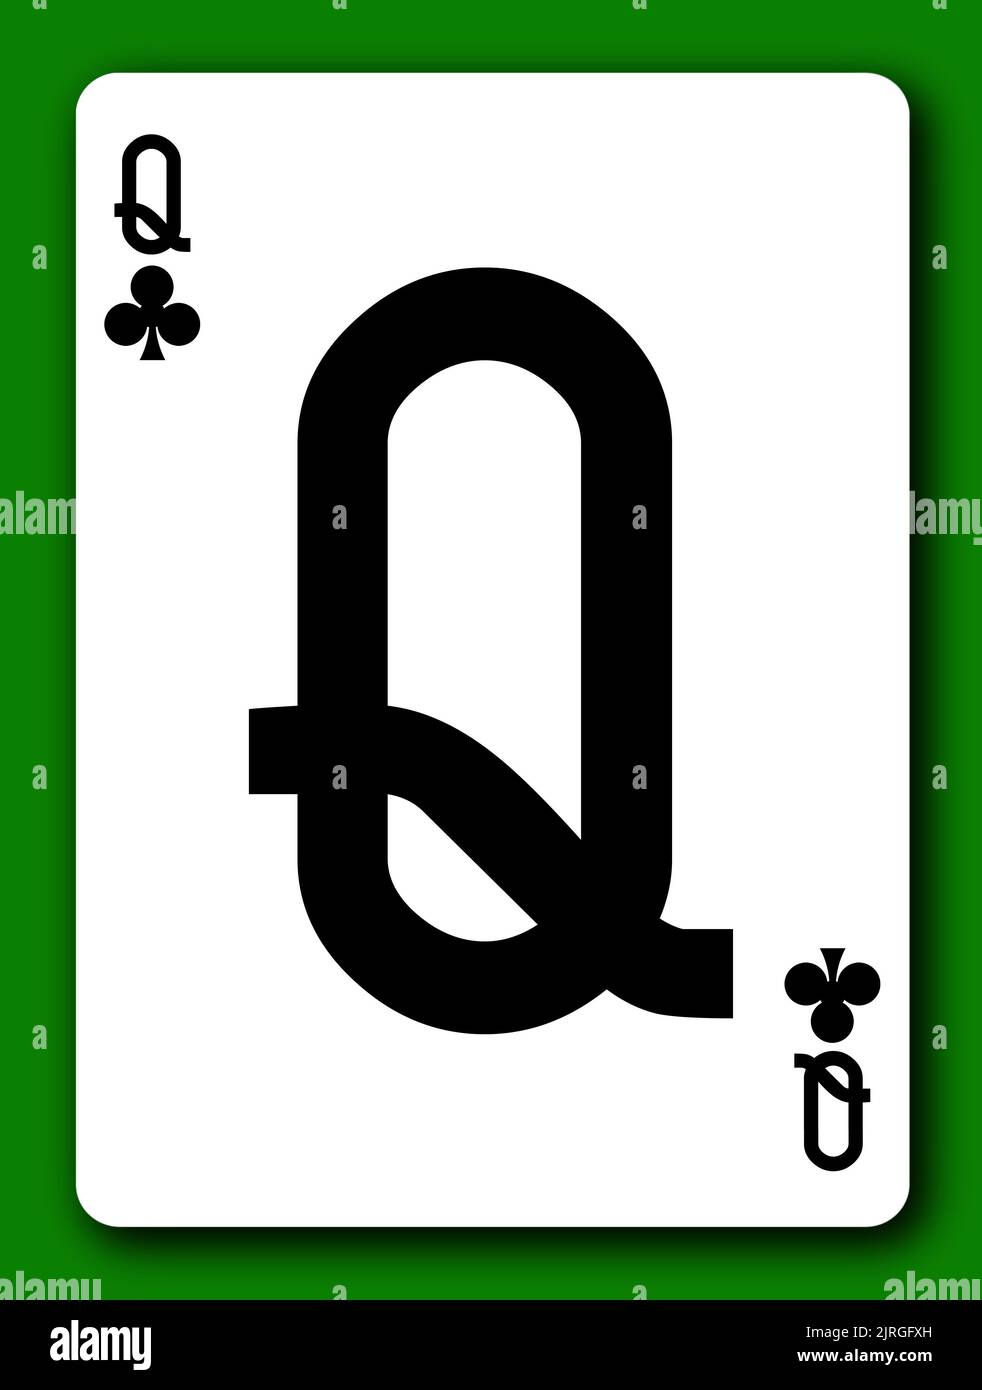 Queen of Clubs playing card with clipping path 3d illustration Stock Photo